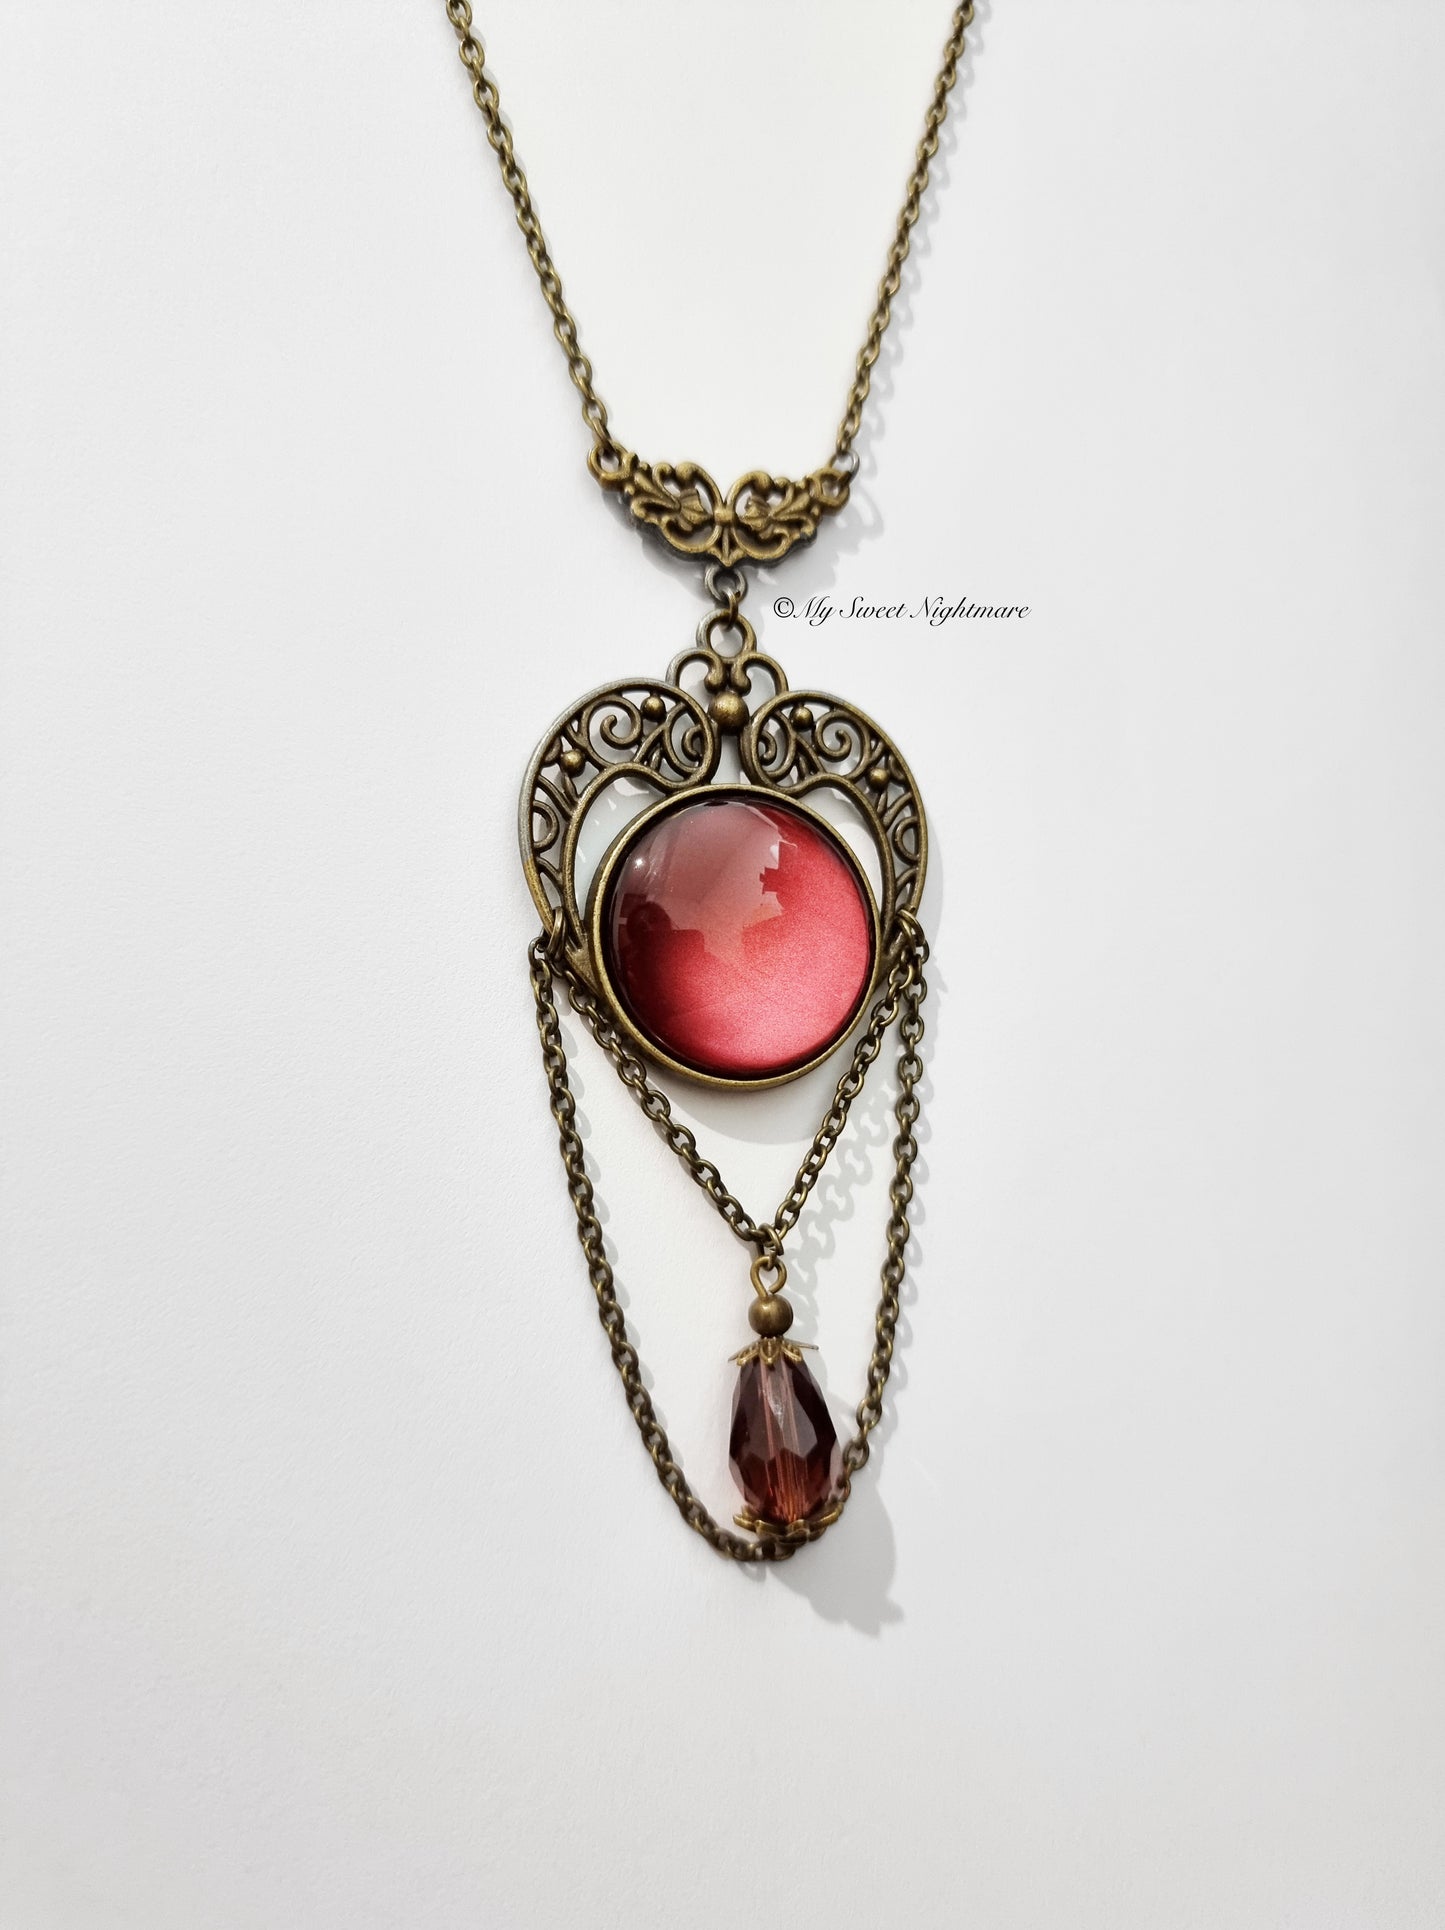 Bronze necklace with red glass and crystal stone